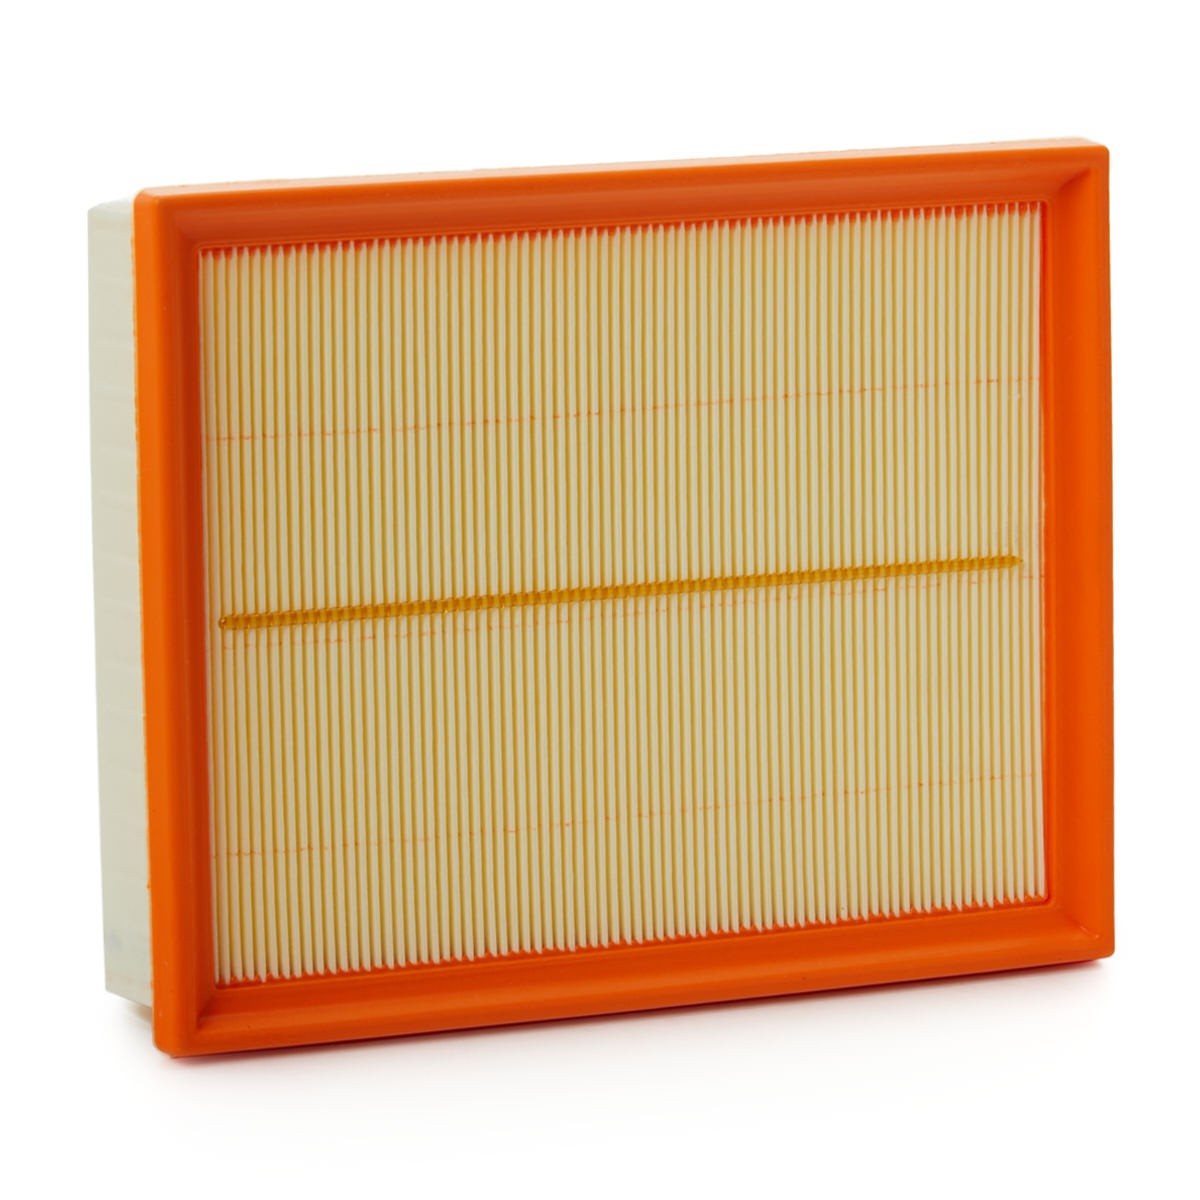 Original HENGST FILTER 6541310000 Air filters E1251L for FIAT COUPE